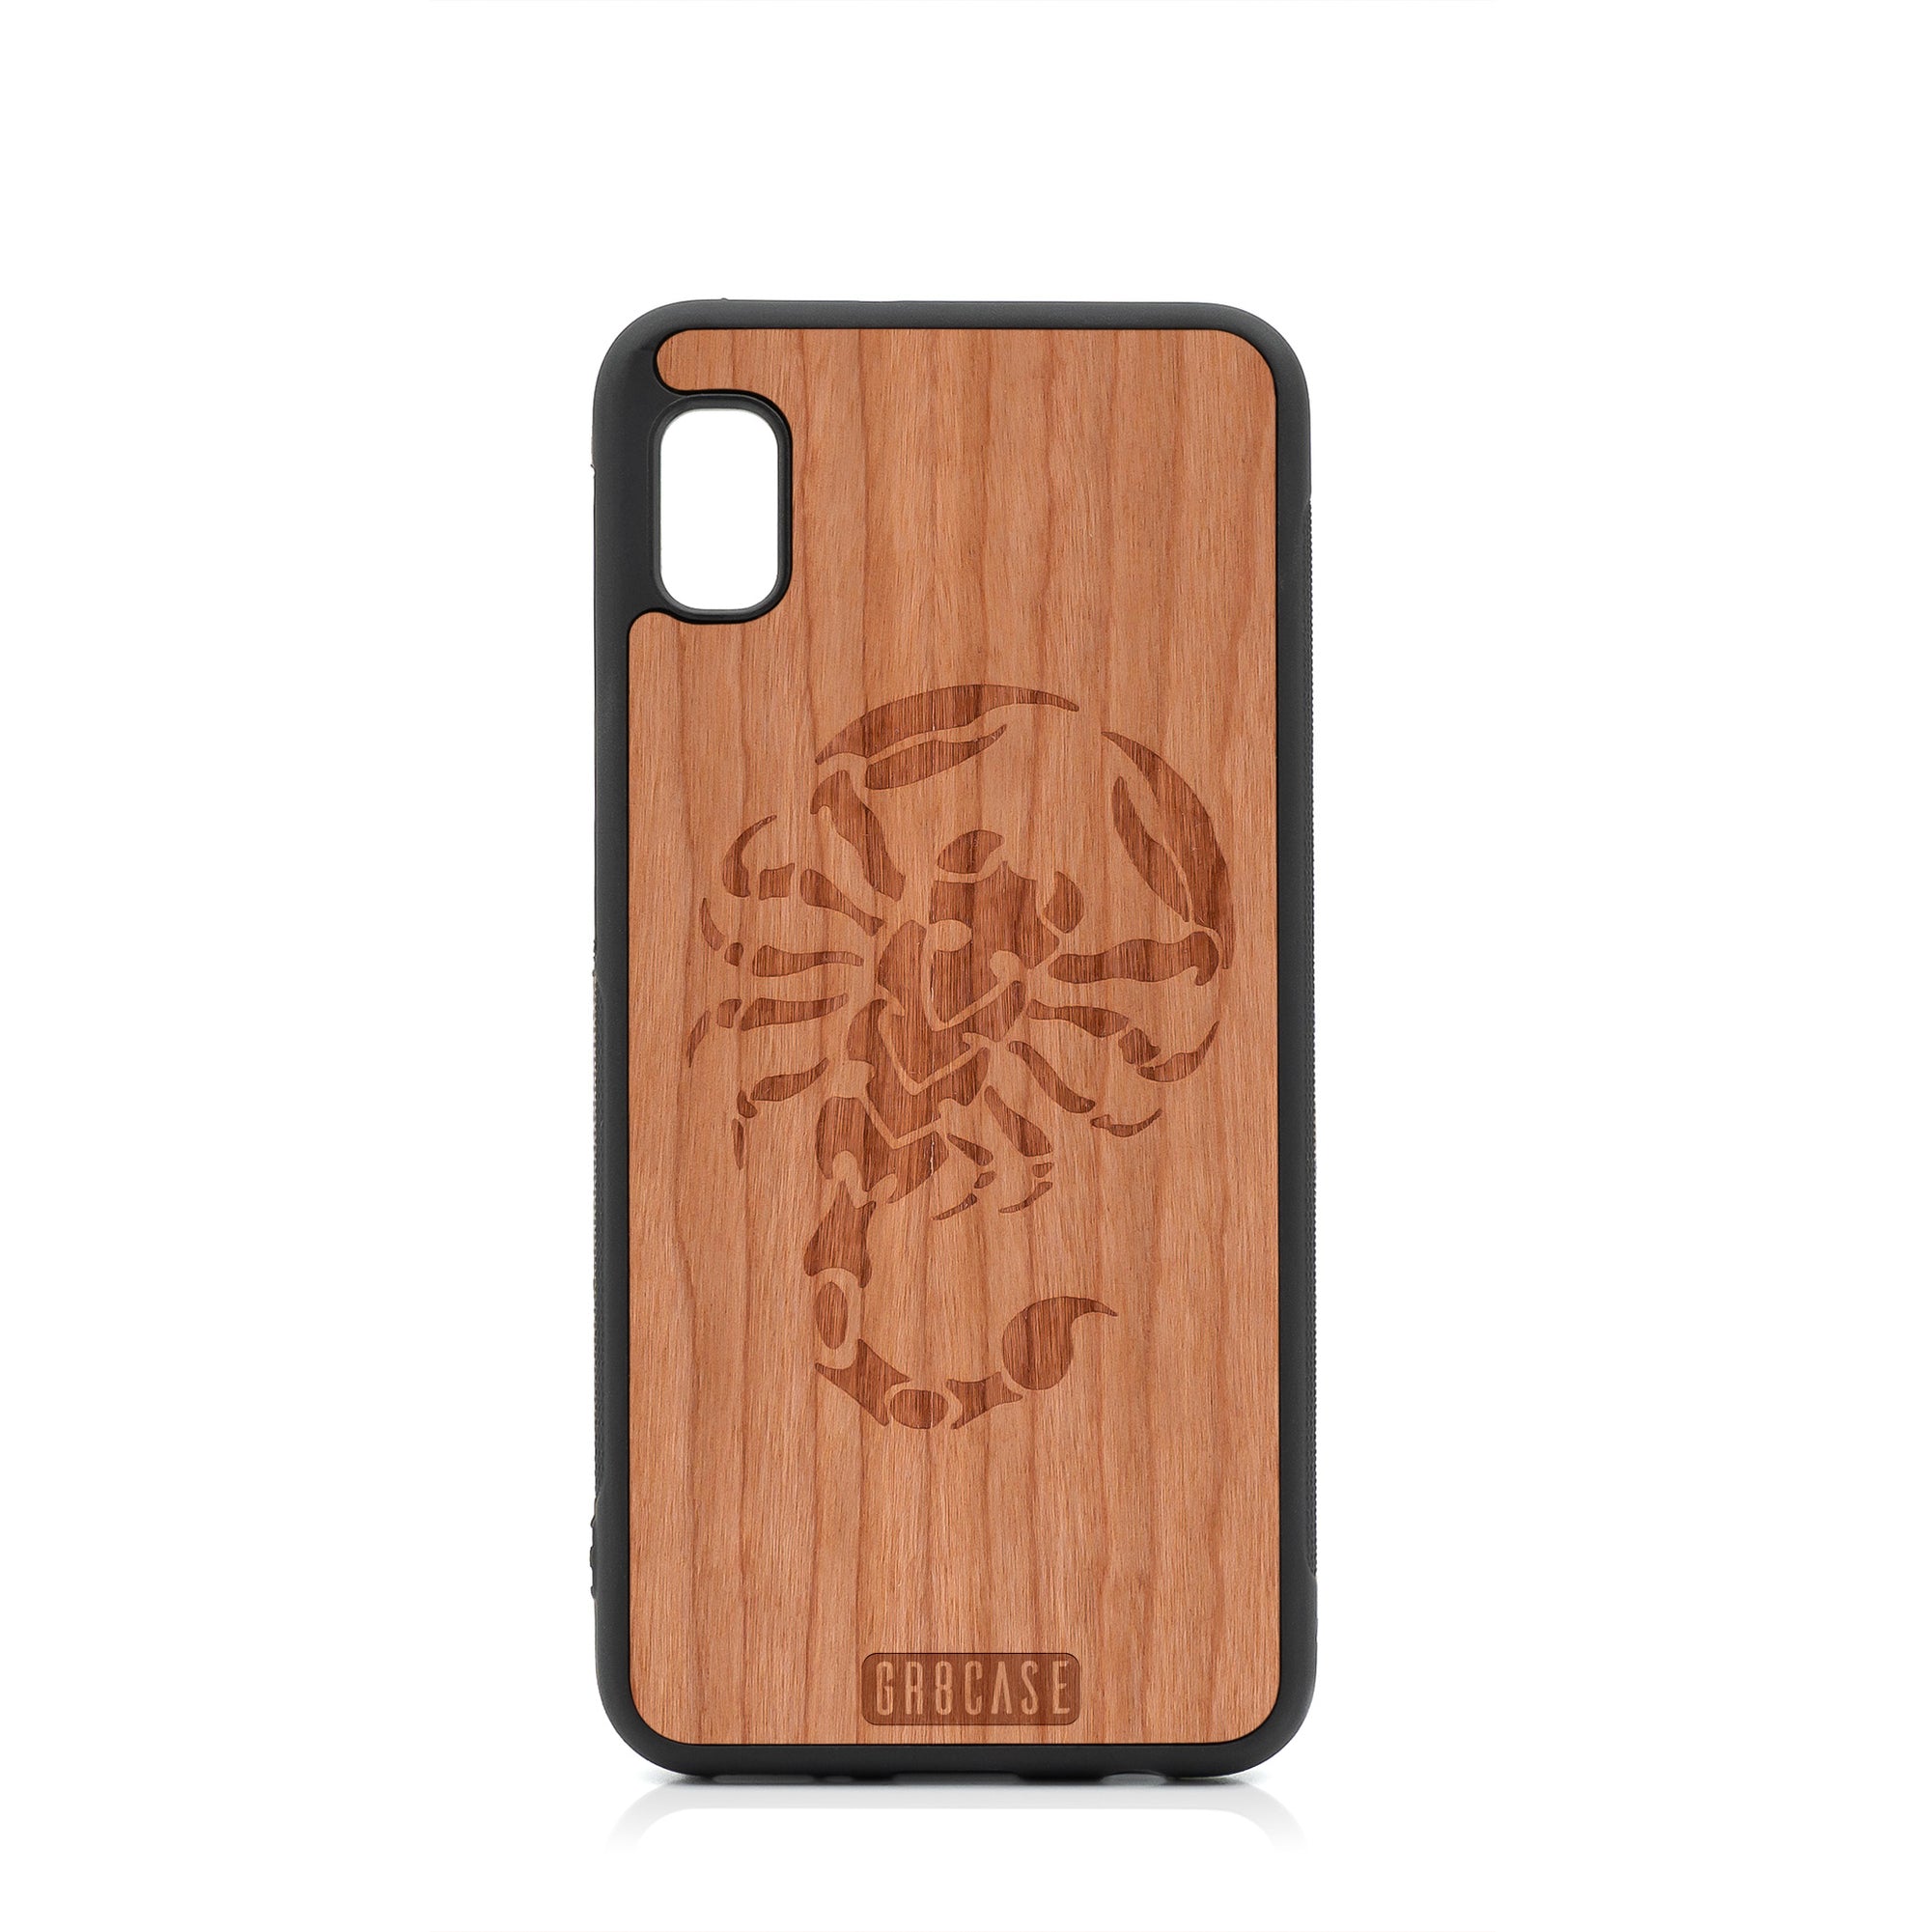 Scorpion Design Wood Case For Samsung Galaxy A10E by GR8CASE